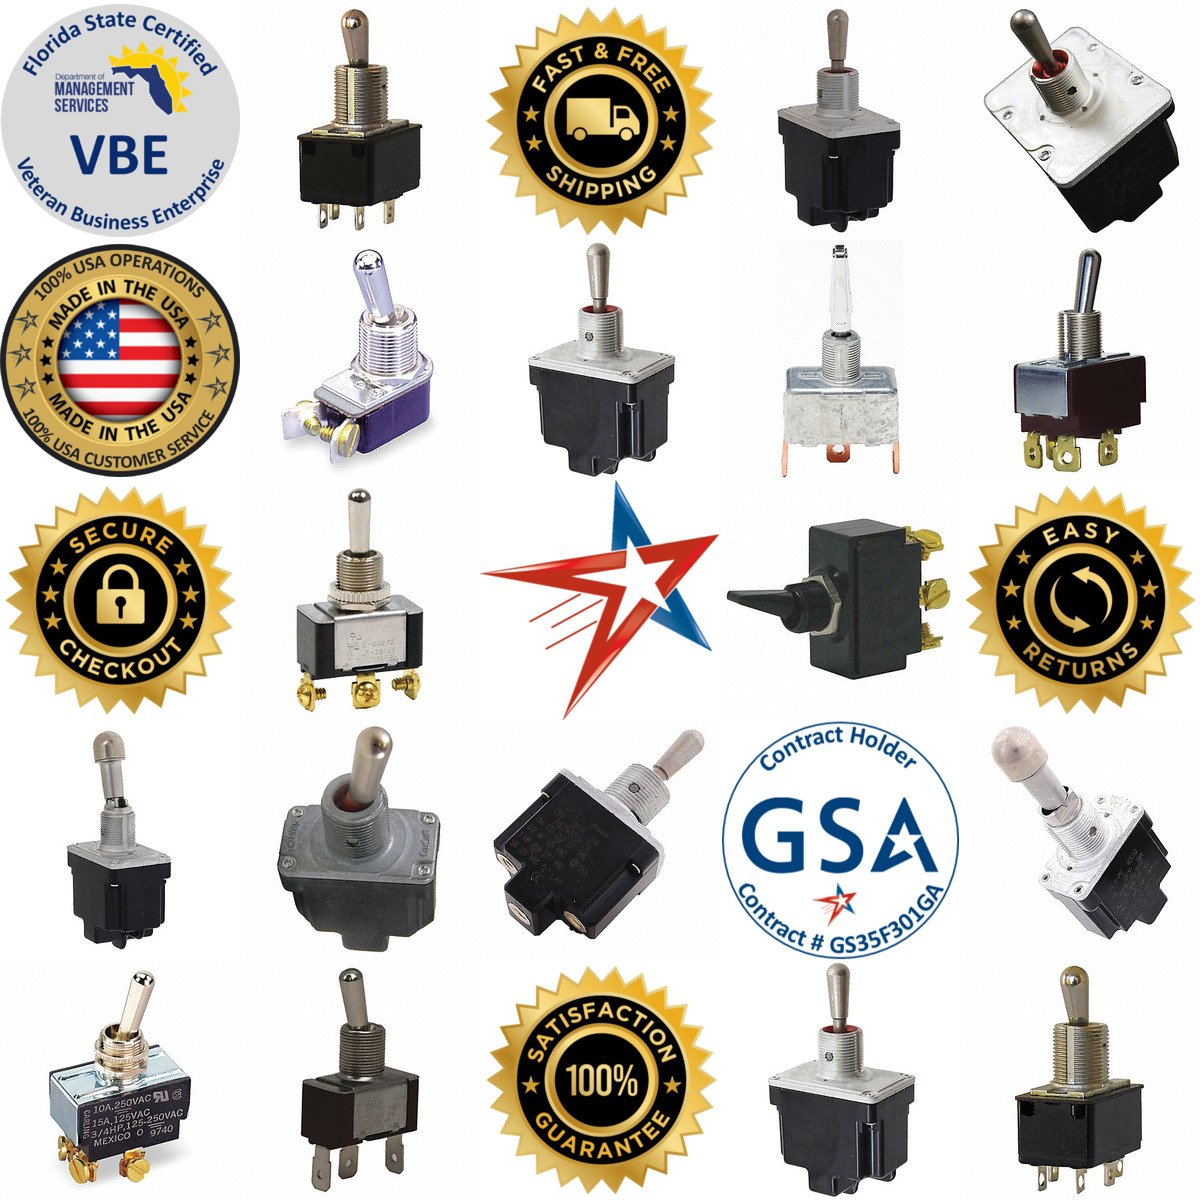 A selection of Toggle Switches products on GoVets